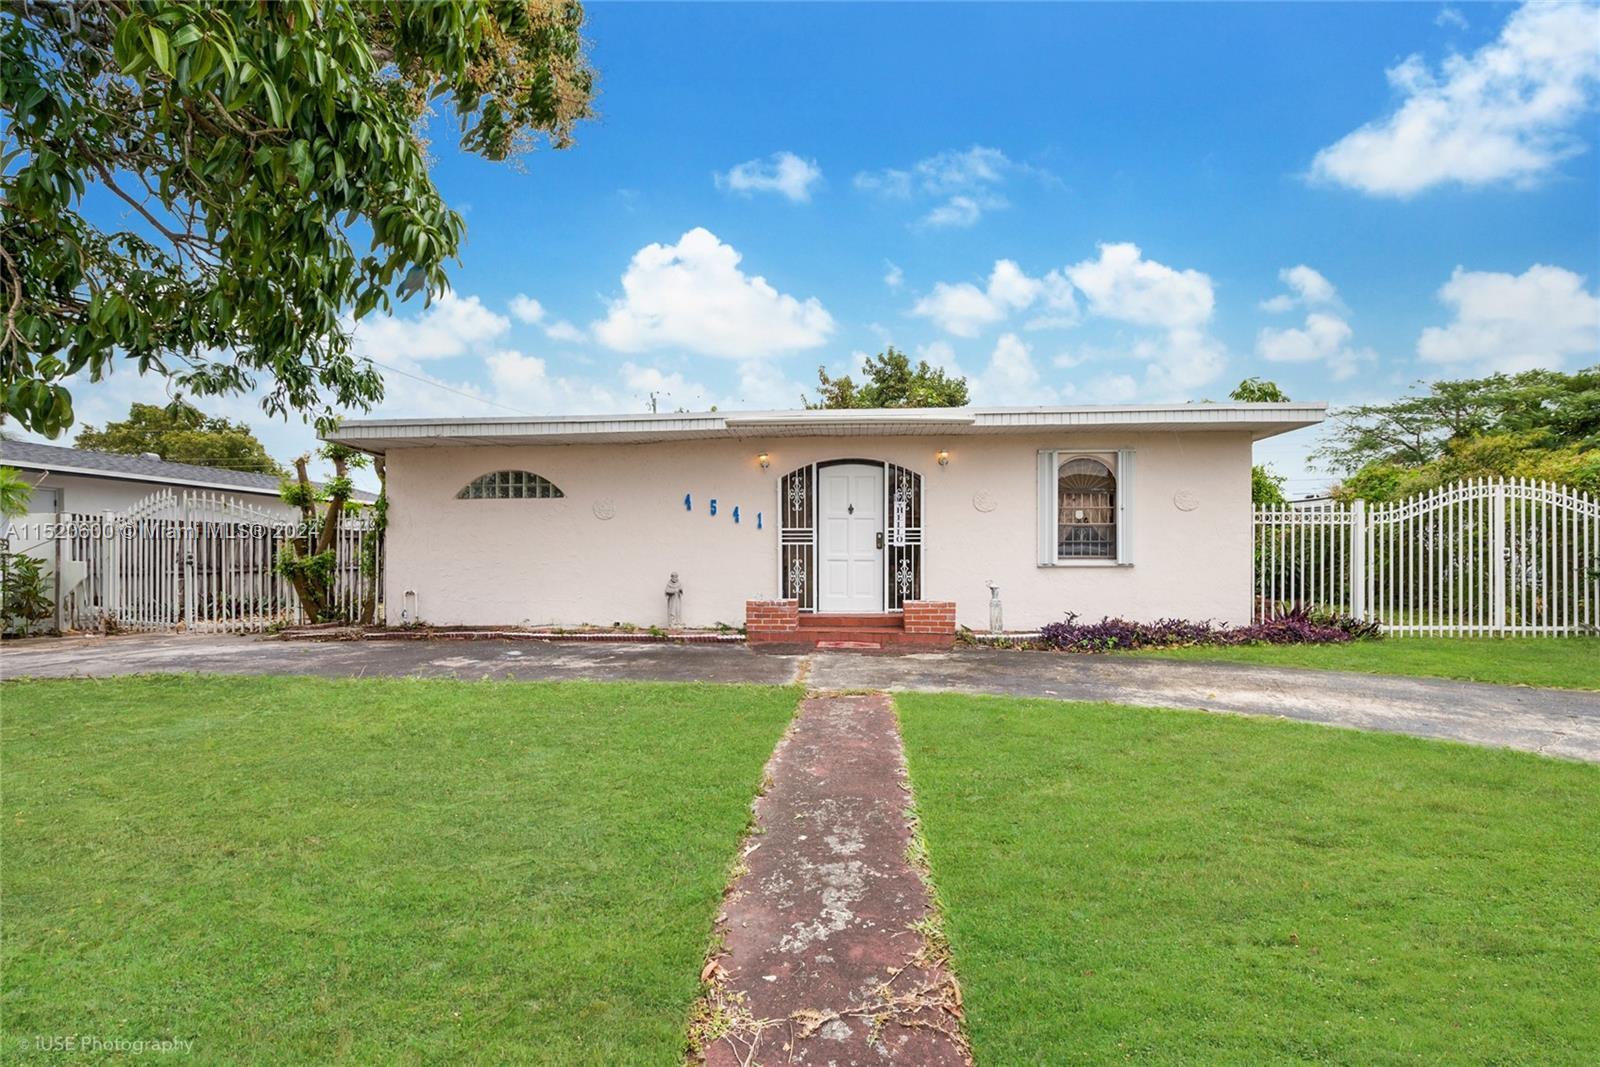 Welcome to this charming home nestled in the serene Olympia Heights neighborhood of Miami. This char